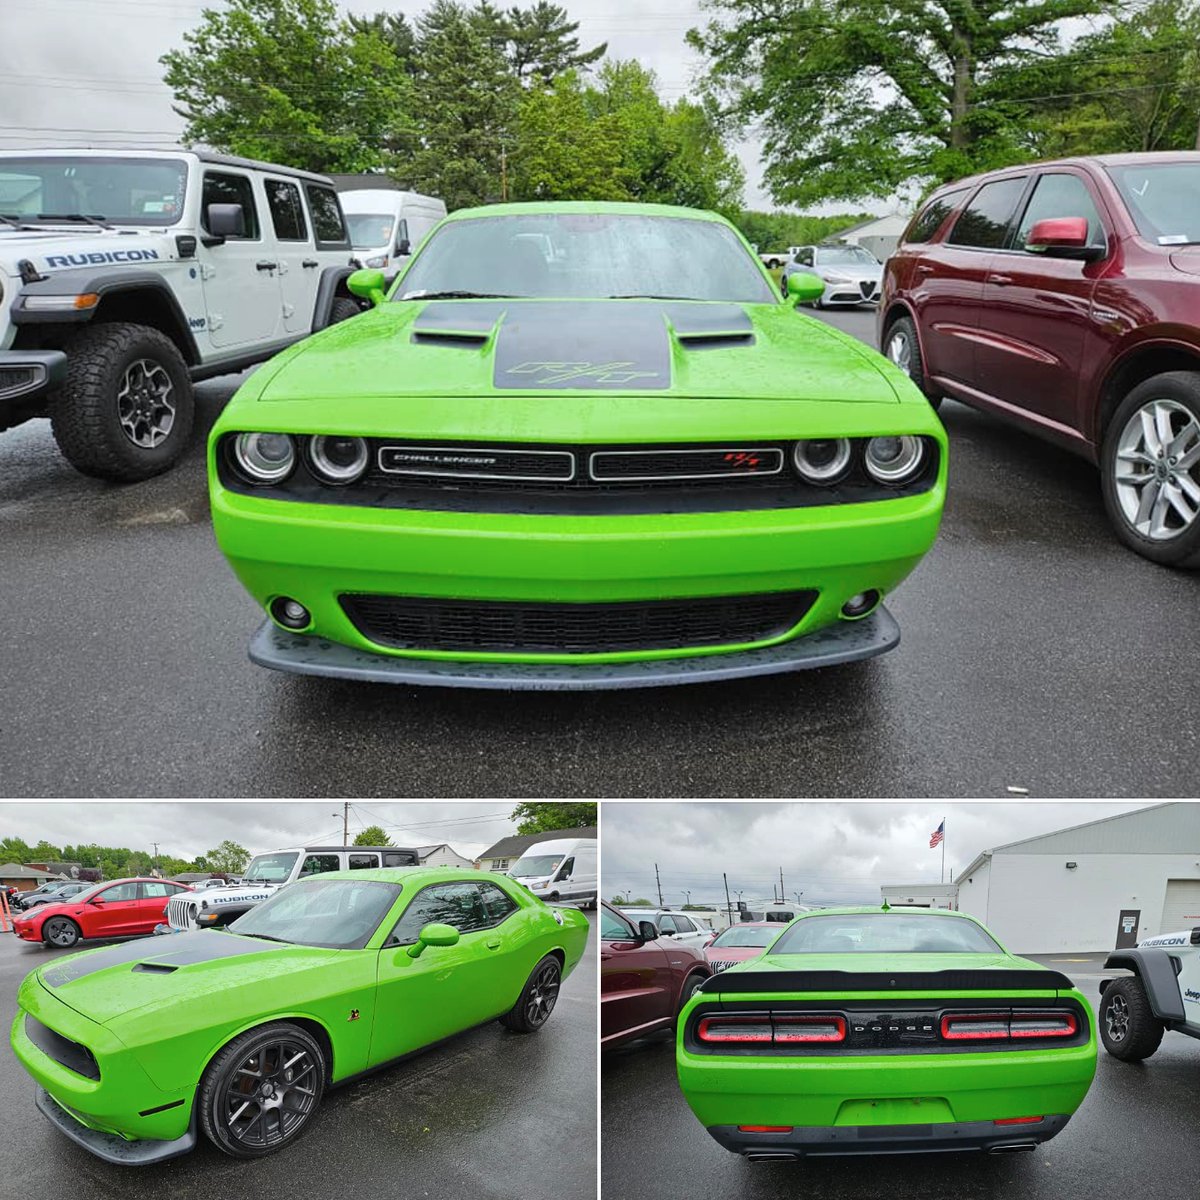 Memorial Day Sales Event❗️2017 #Dodge #Challenger R/T Scat Pack in Green Go 💚 Take advantage of these amazing sales going on RIGHT NOW!
#DodgeChallenger  #UsedCarsforSale #Auto #Tvillecjdr